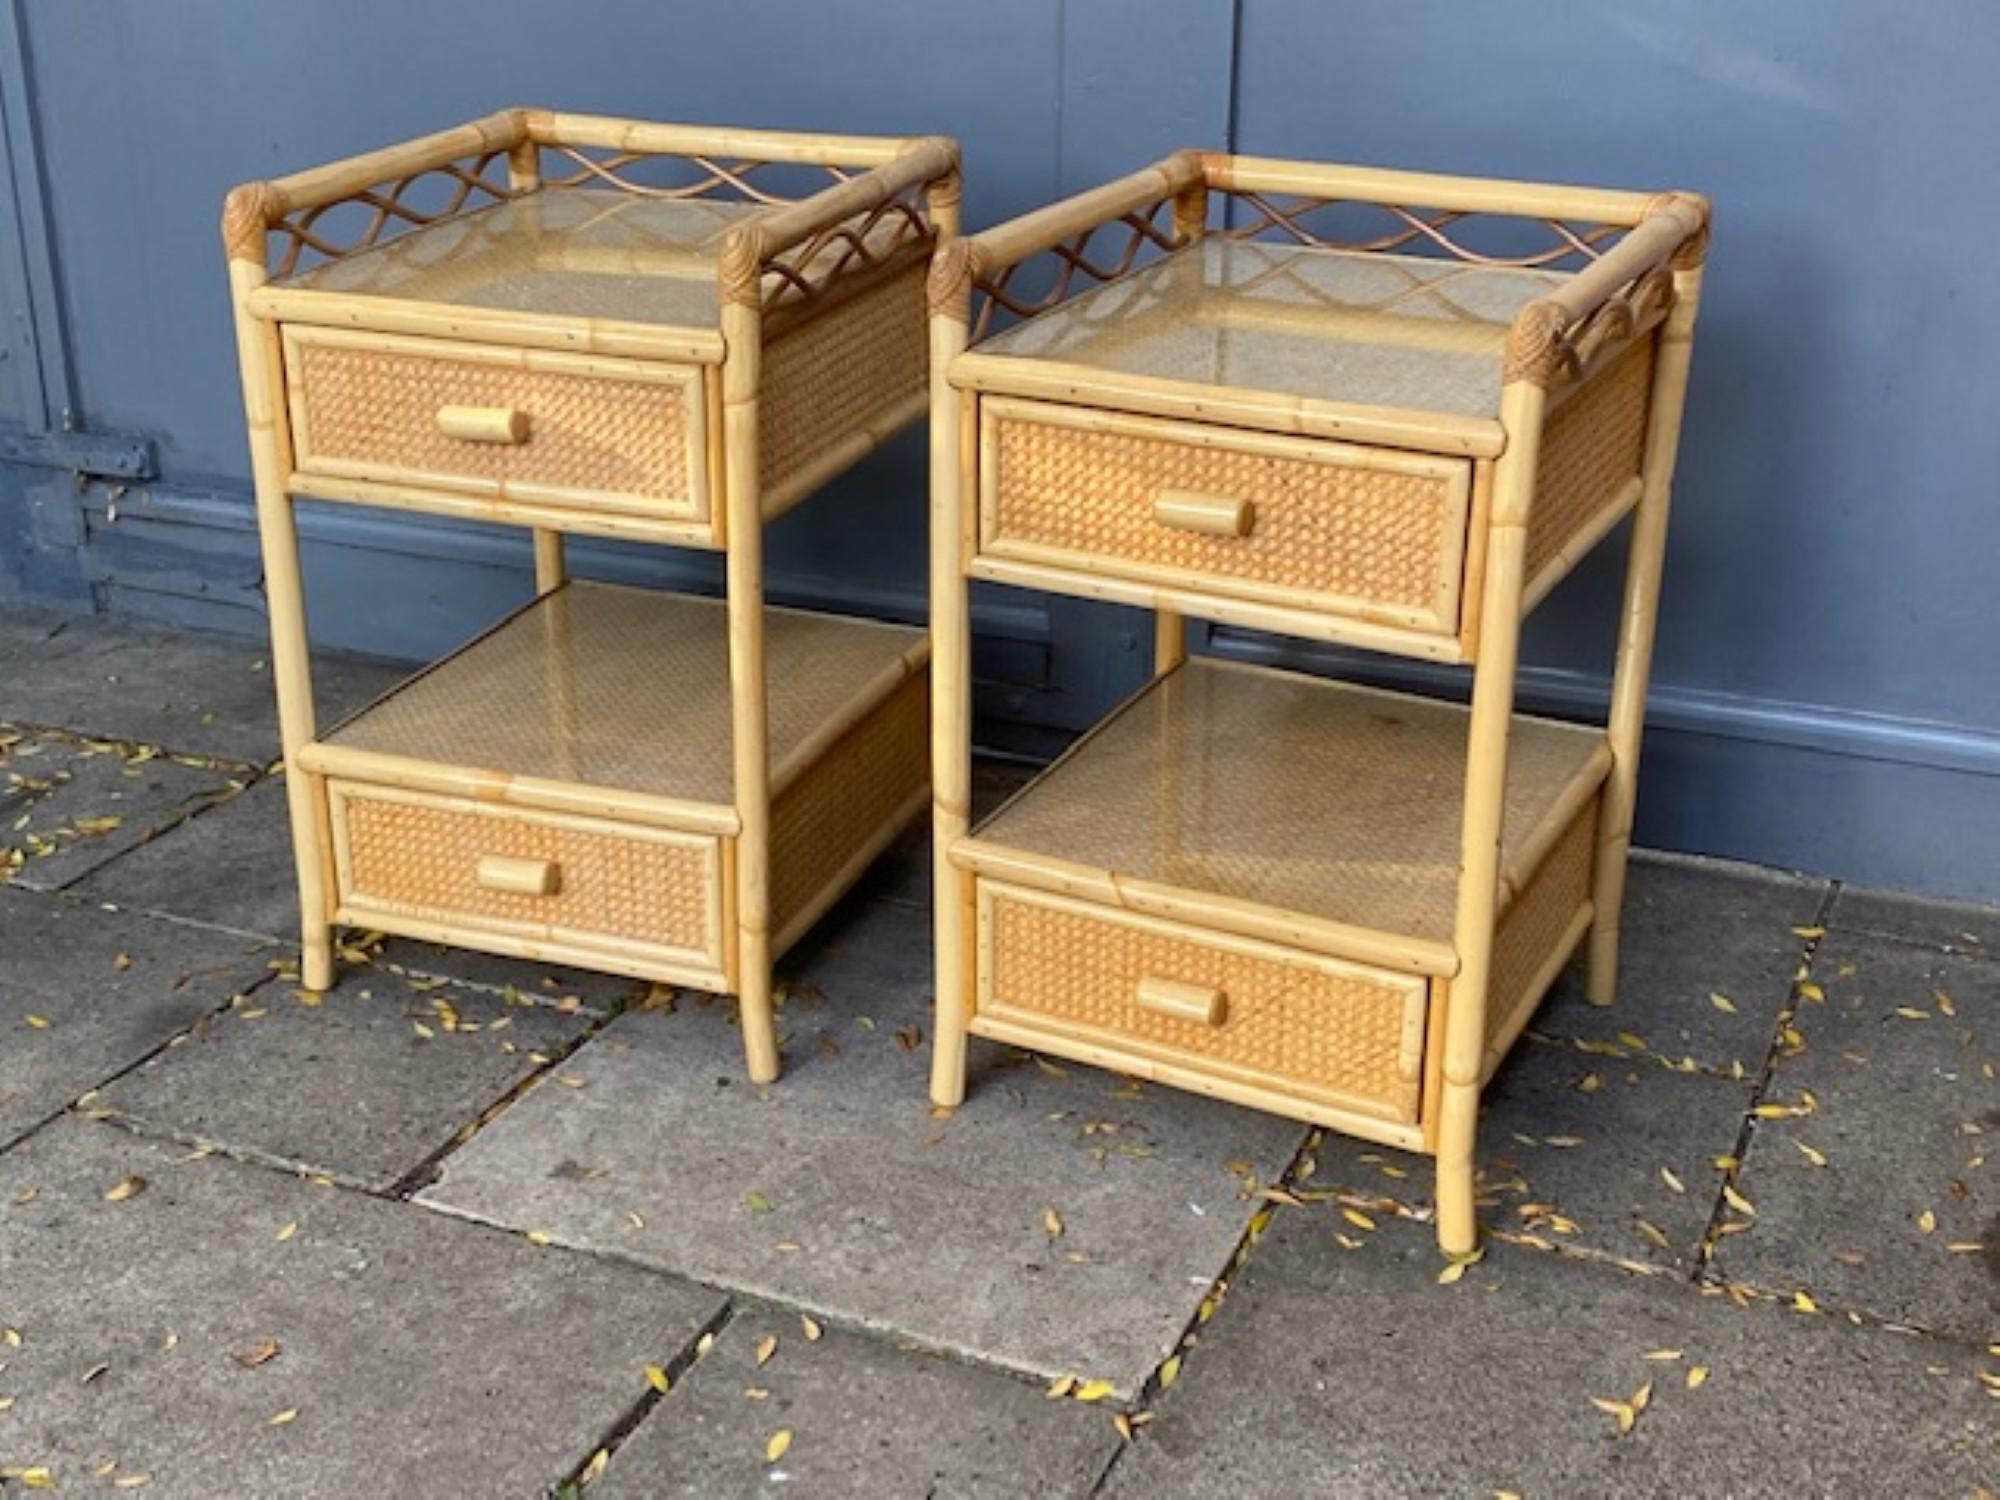 Lacquered Pair of MCM Rattan / Cane Nightstands / Bedside Tables, Angraves, English, 1970s For Sale